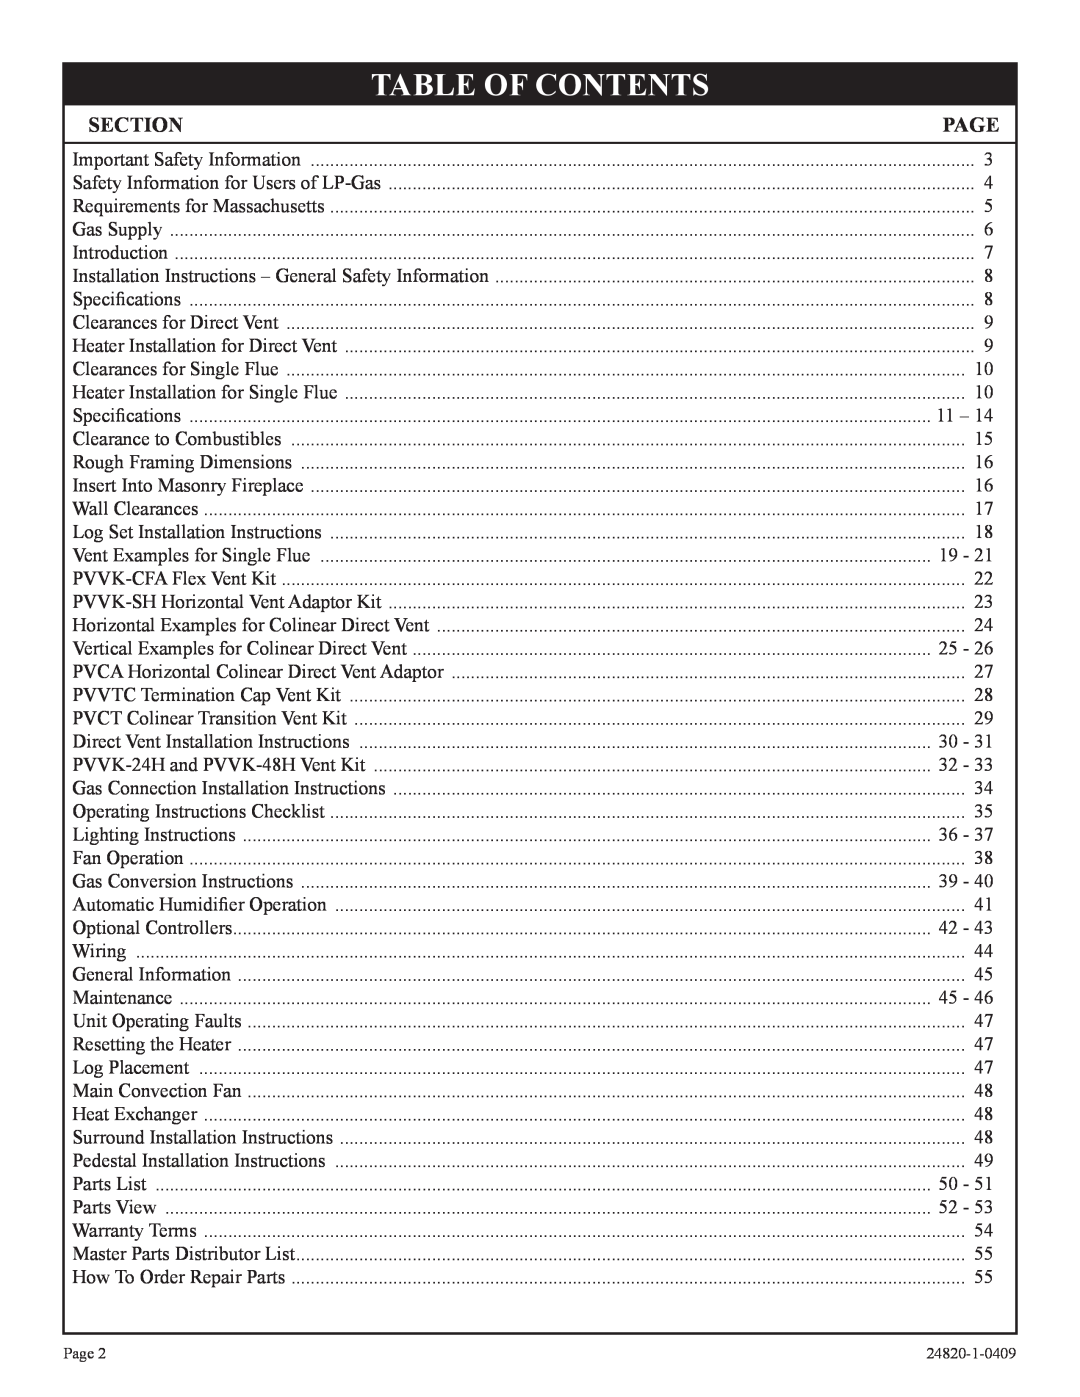 Empire Comfort Systems PV-28SV55-(C,G)2H(N,P)-1, PV-28SV50-B2H(N,P)-1, PV-28SV50-B(N,P)-1 Table Of Contents, Section, Page 